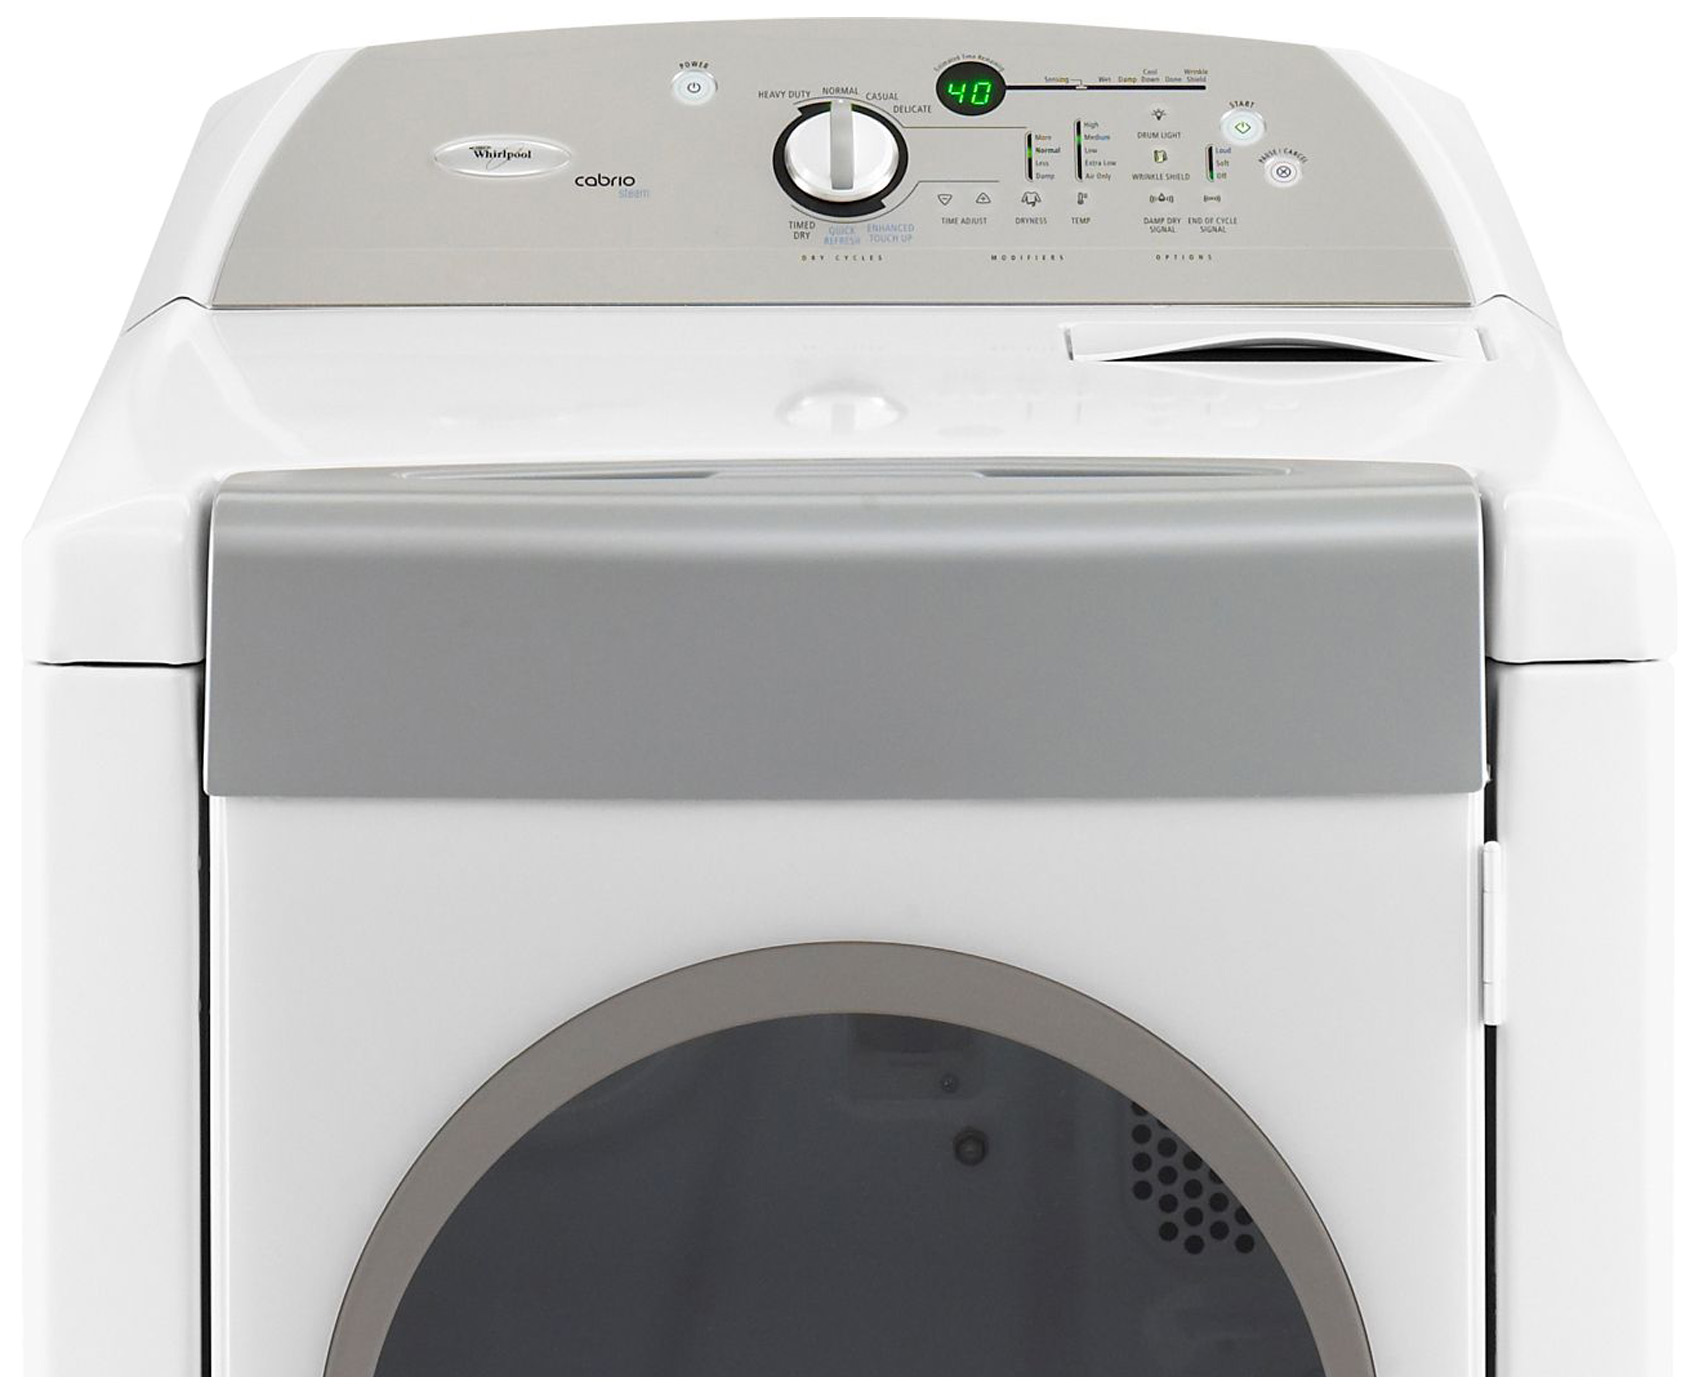 how to reset Whirlpool dryer 3.0